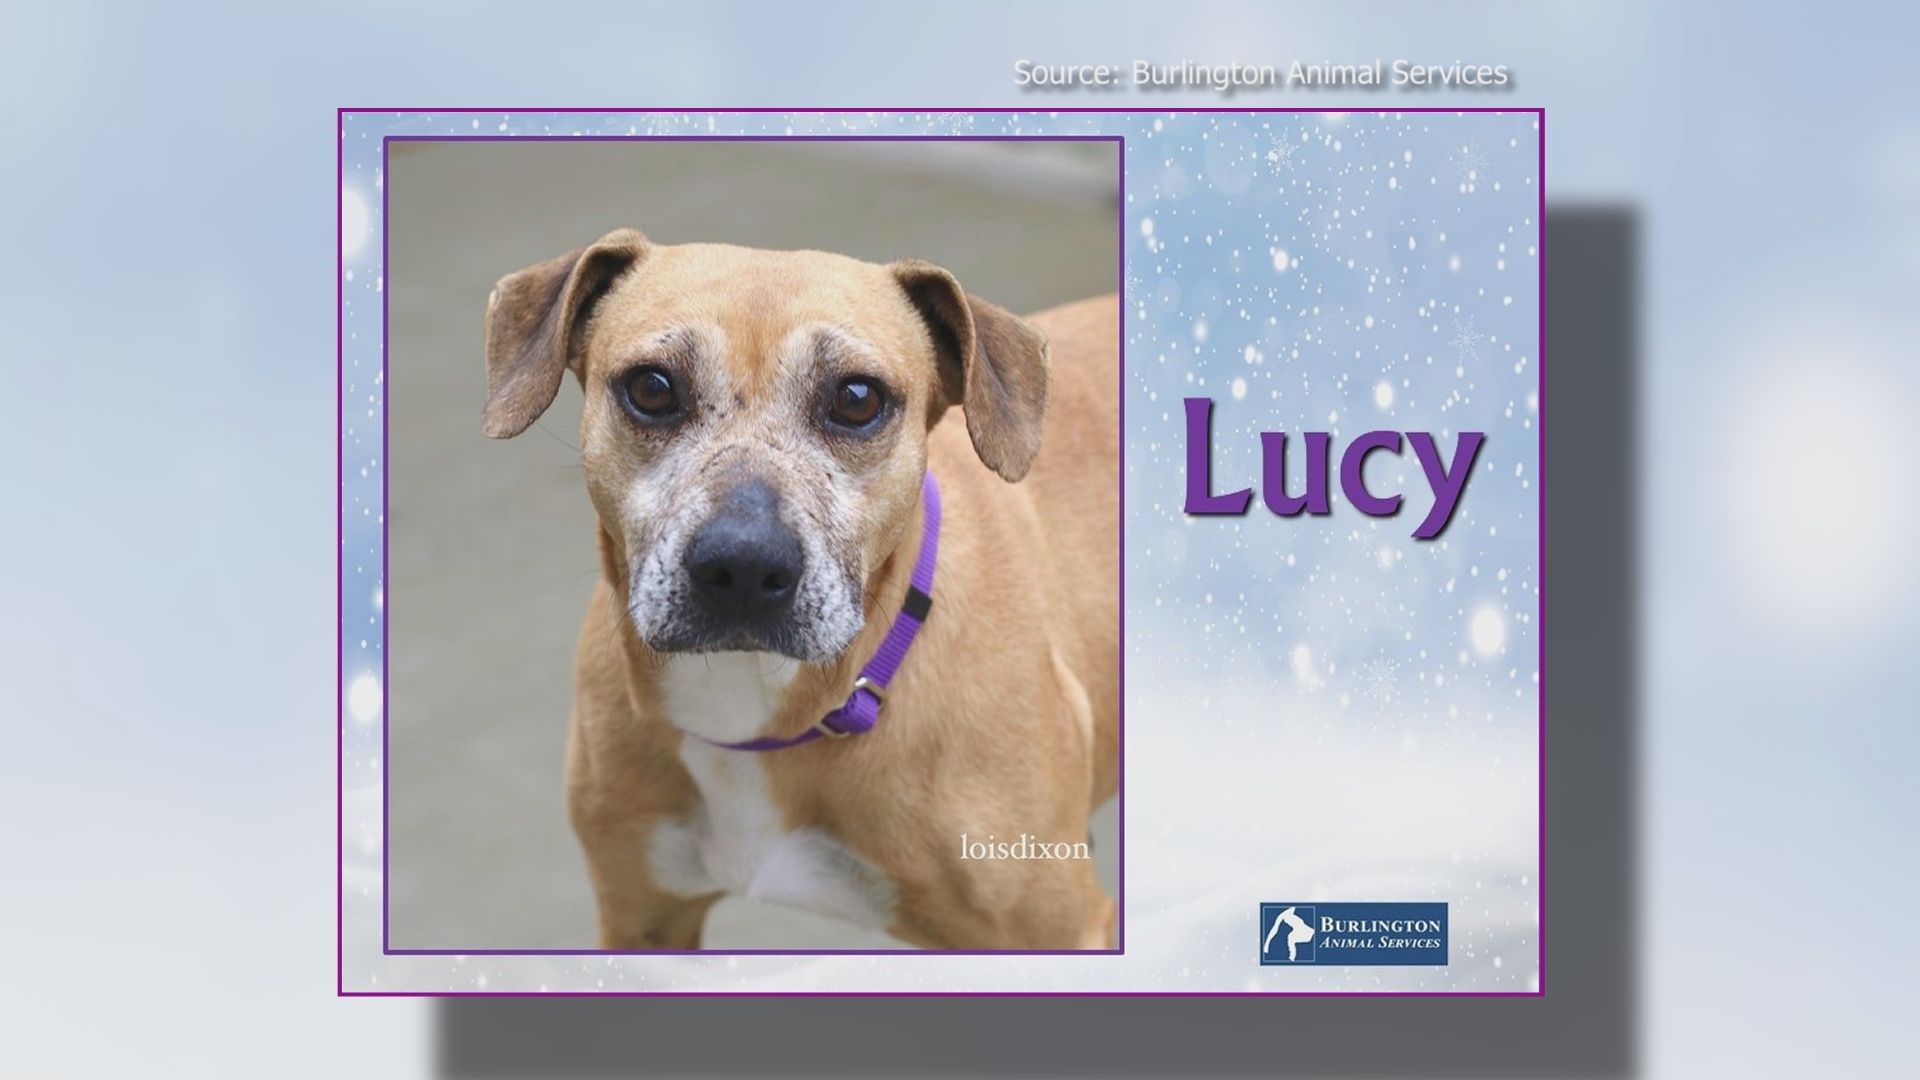 Sweet Lucy wants to be your fur-ever friend, can you help her out?